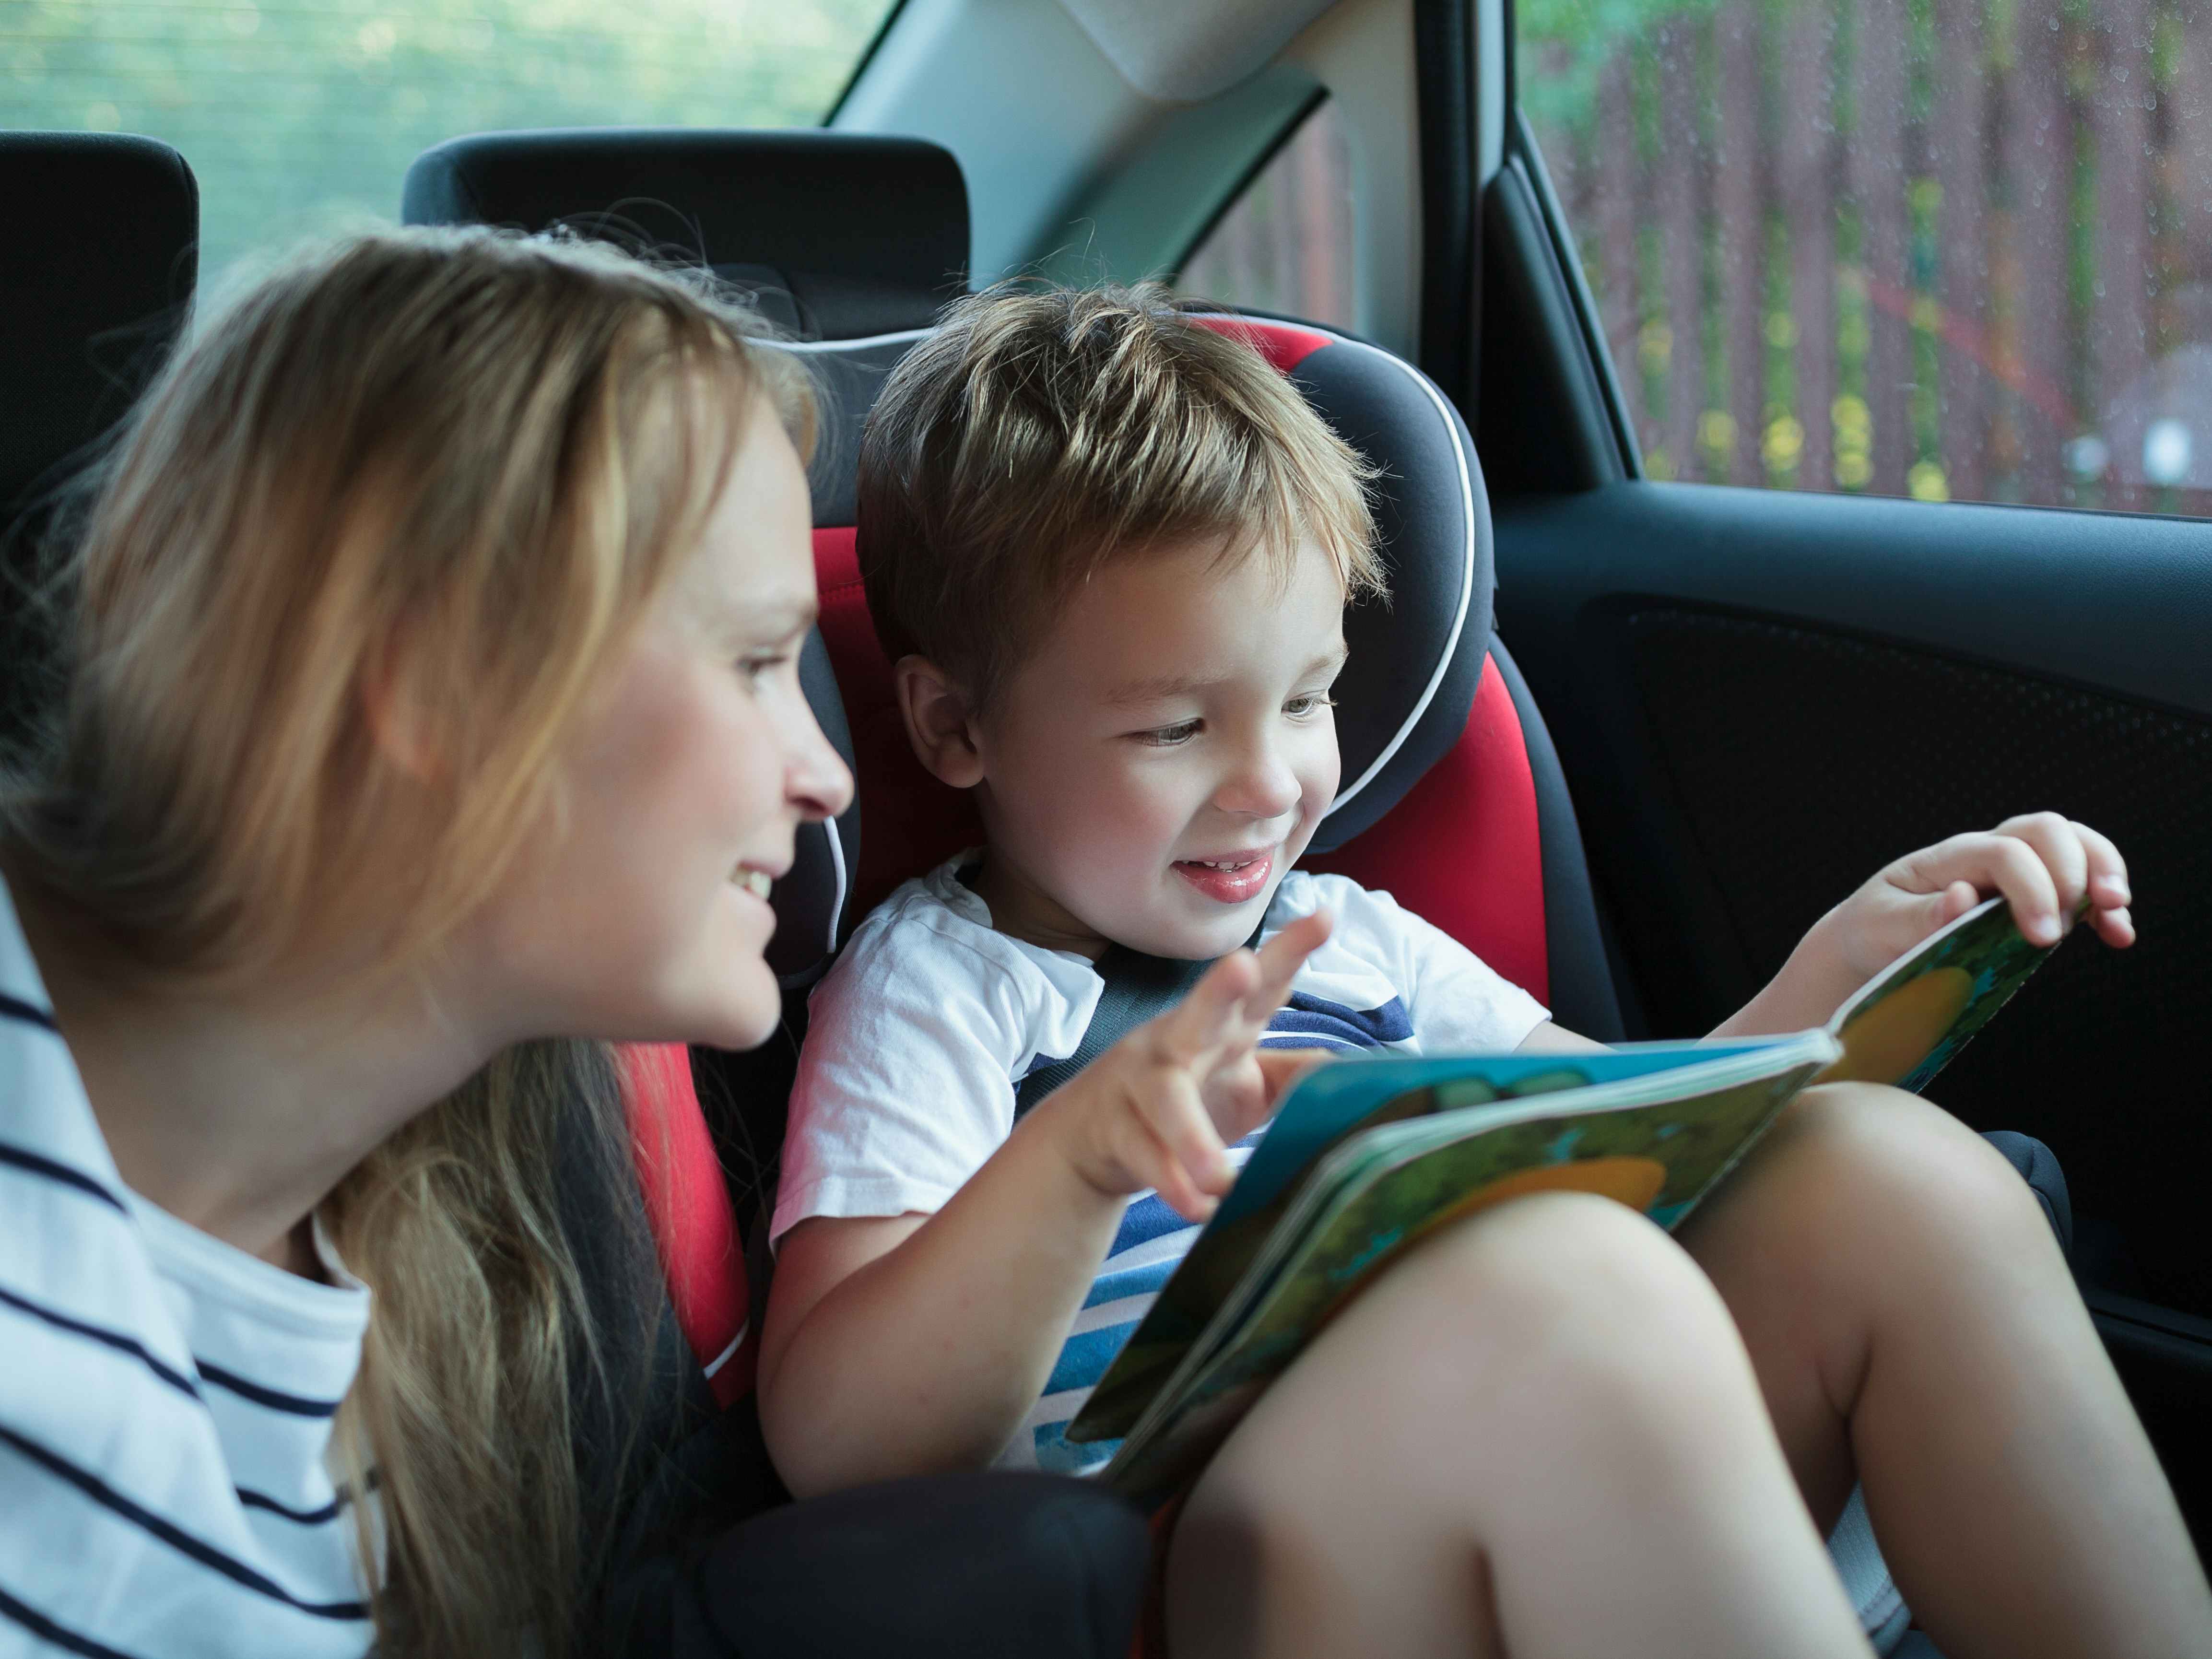 A mother and her child in the back seat of a vehicle, looking at a children's book